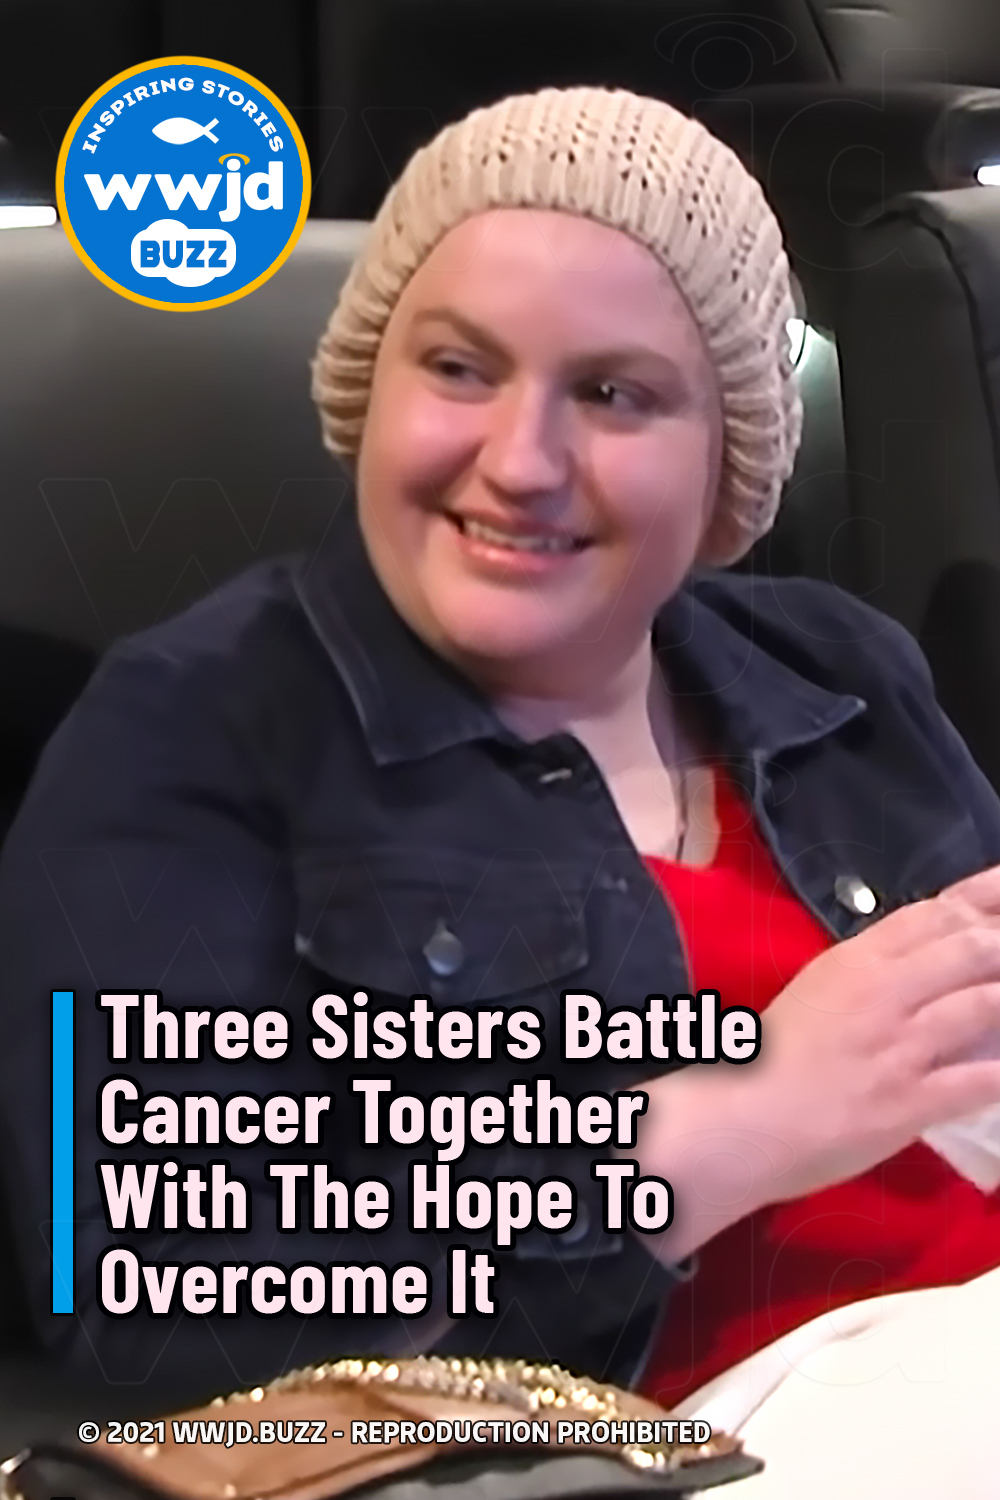 Three Sisters Battle Cancer Together With The Hope To Overcome It